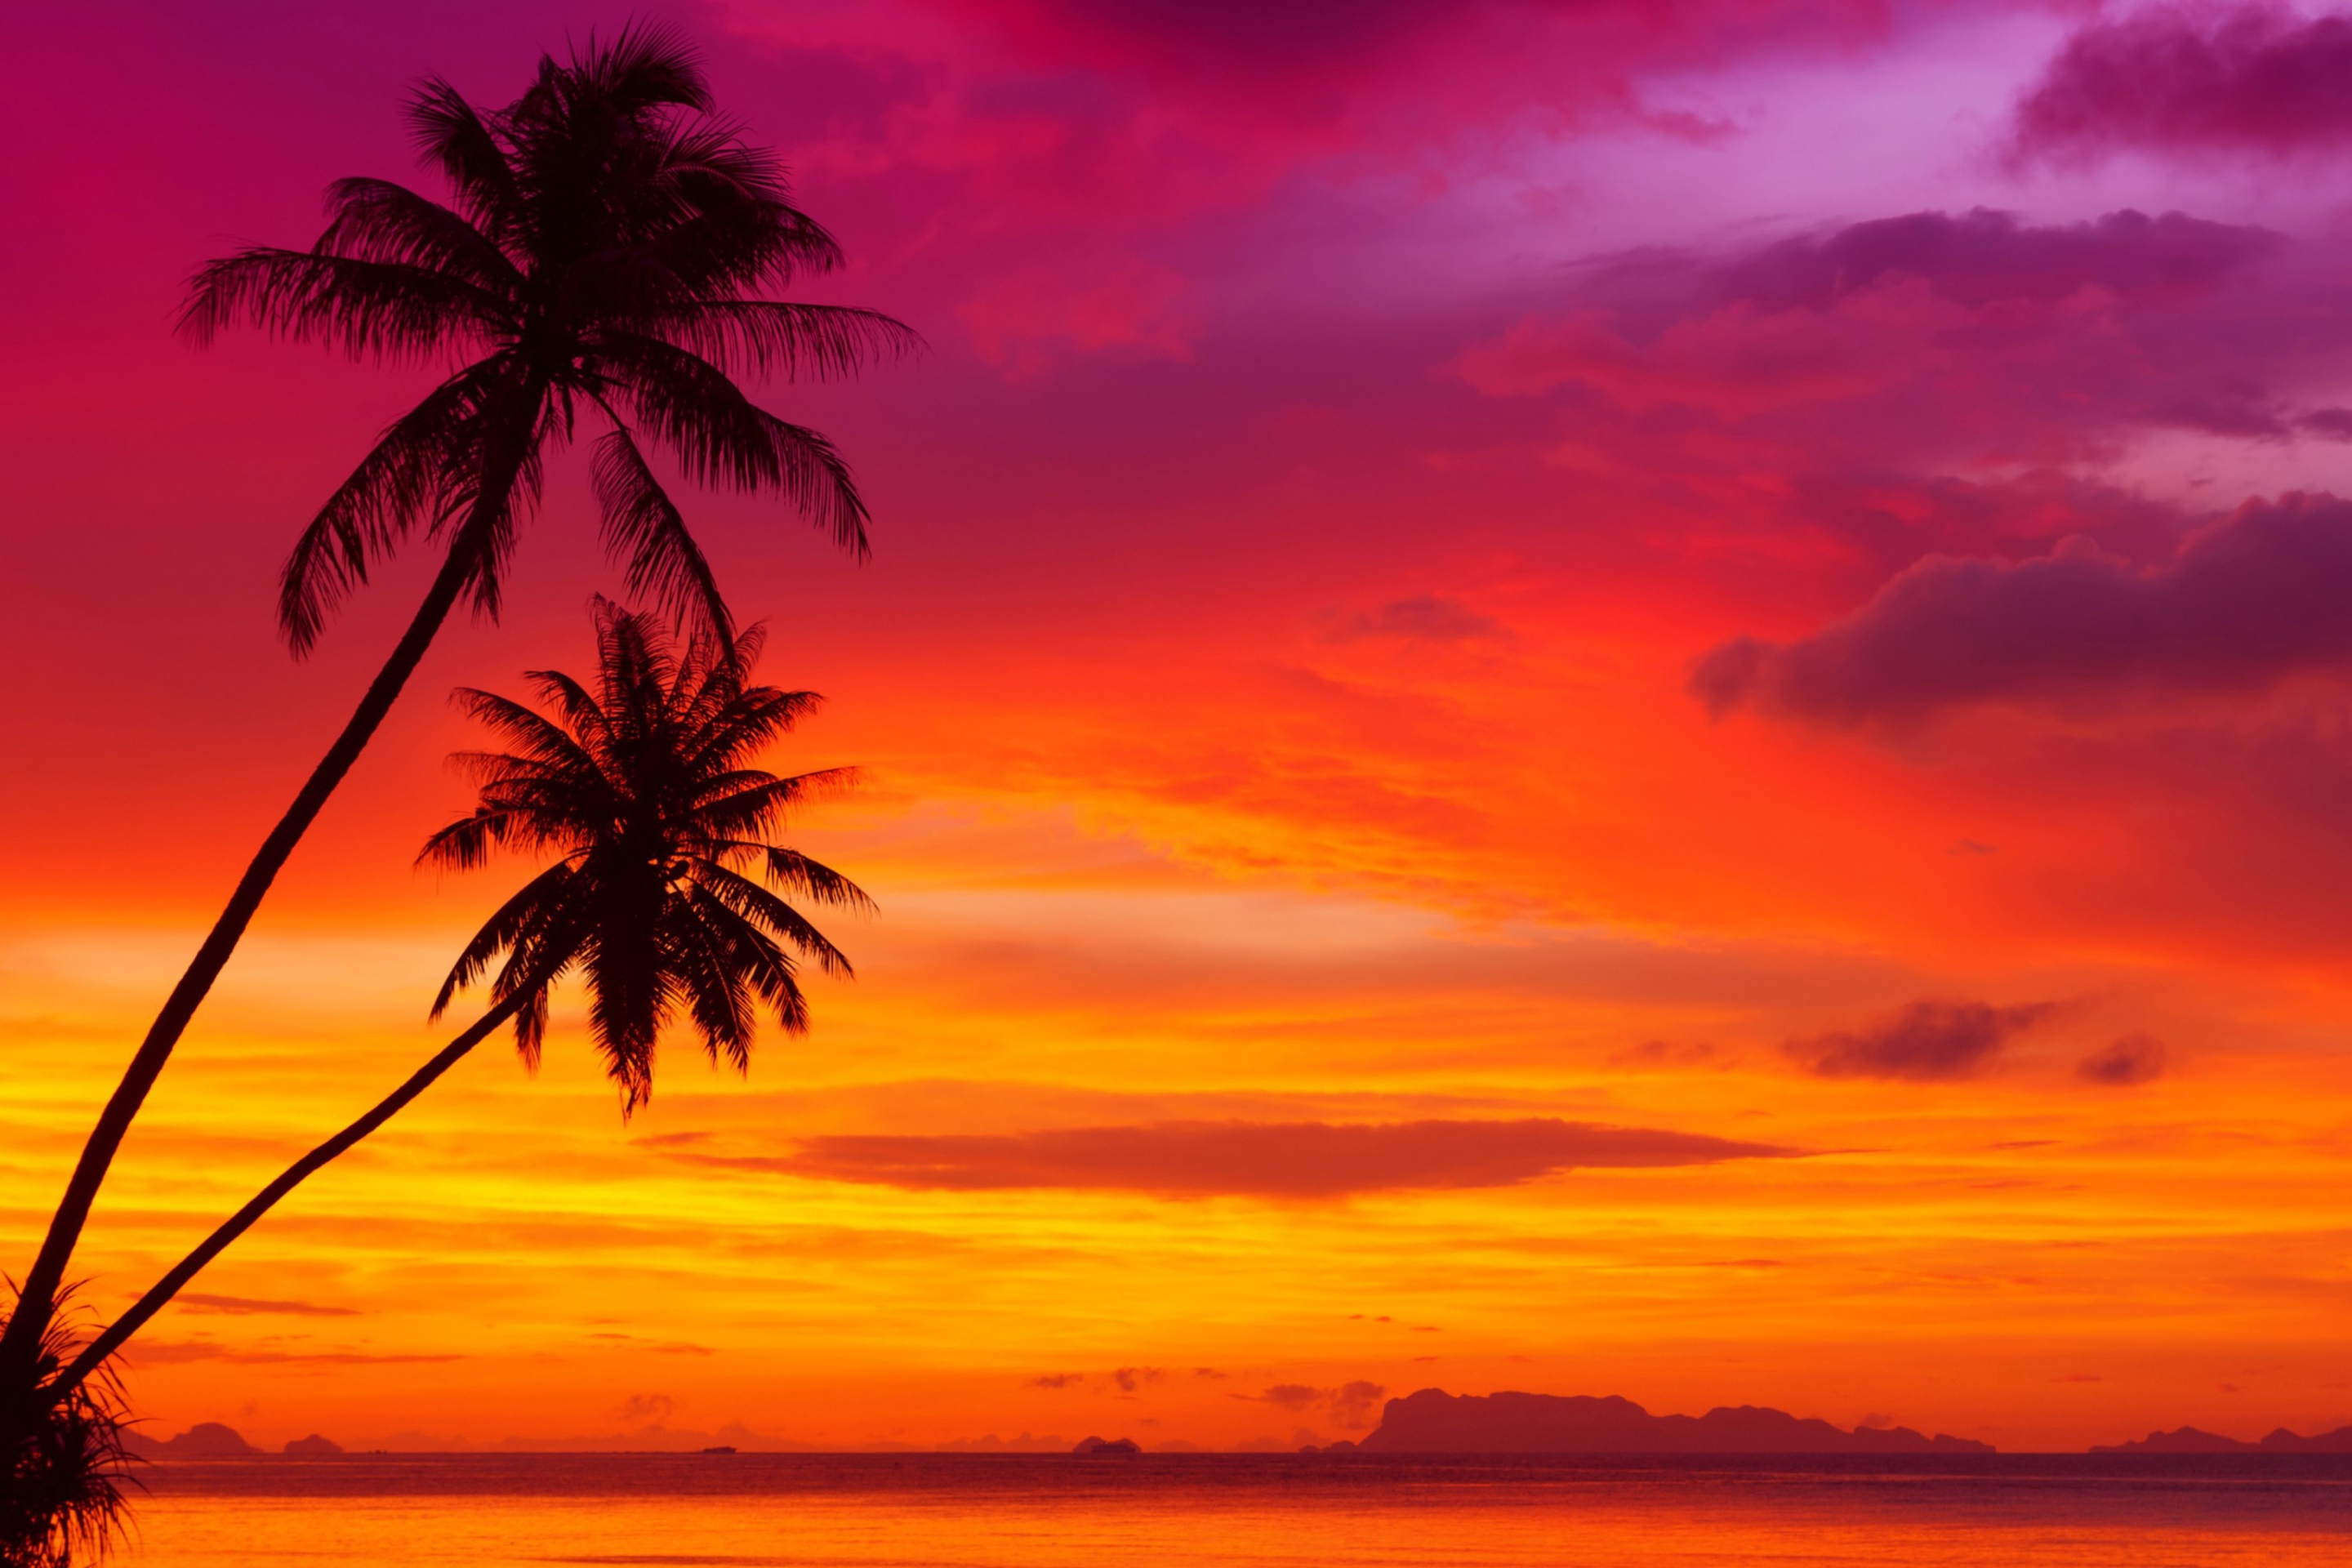 Amazing Pink And Orange Tropical Sunset wallpaper 2880x1920